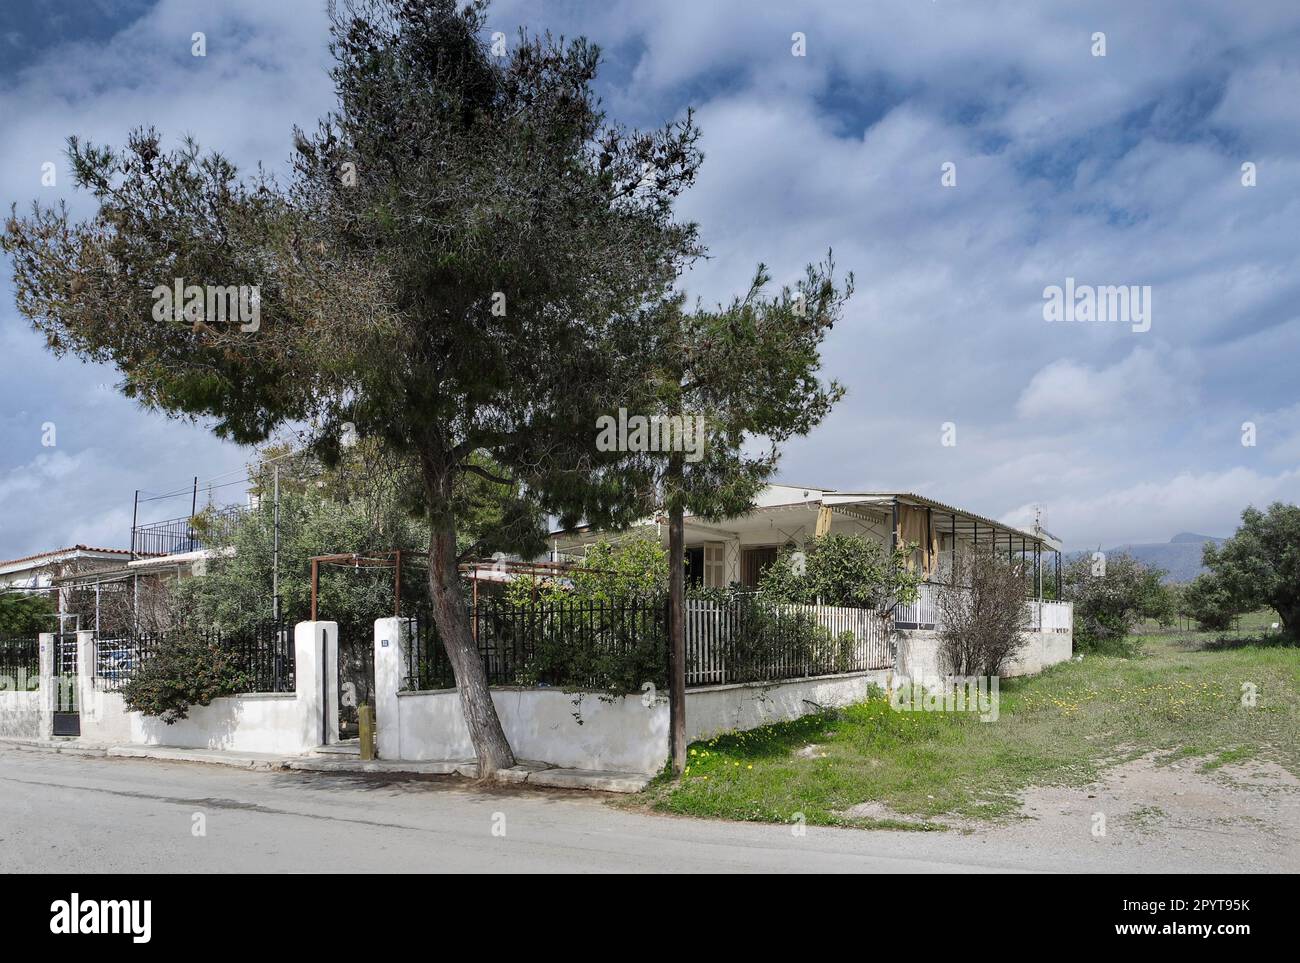 A pine big tree outside a countryside old house in Nea Peramos, Greece Stock Photo